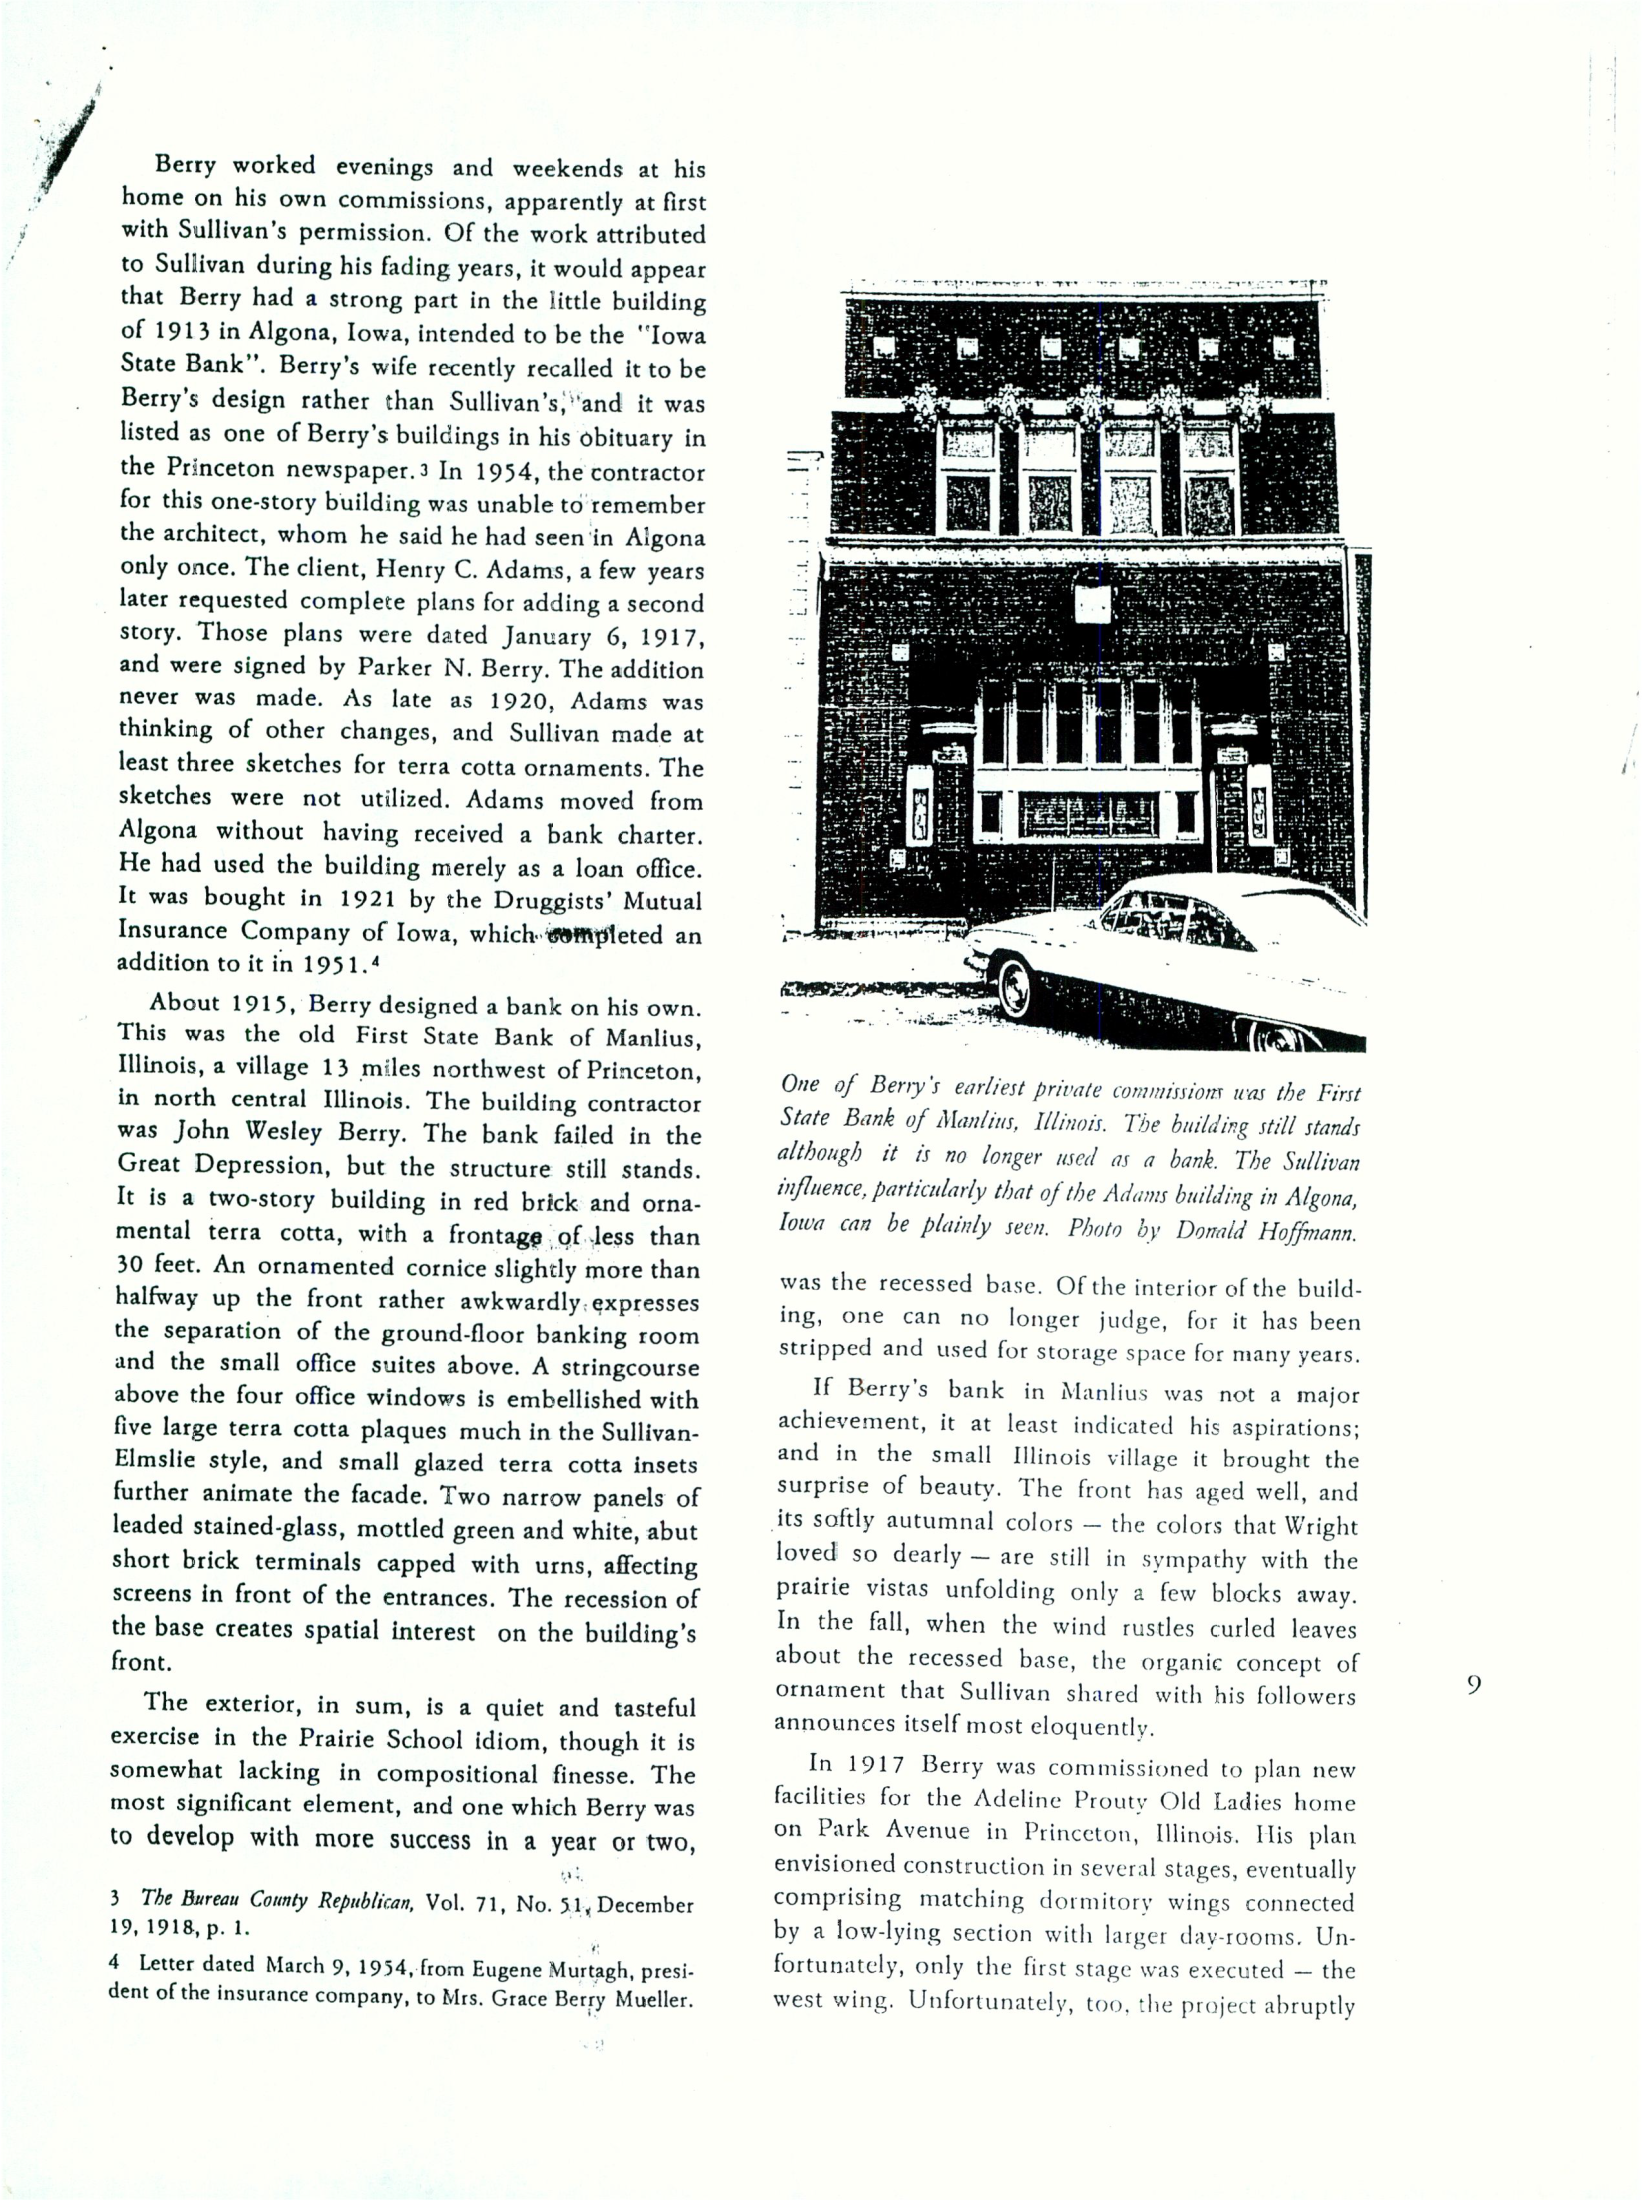 Album 11 FIRST STATE BANK Page 091